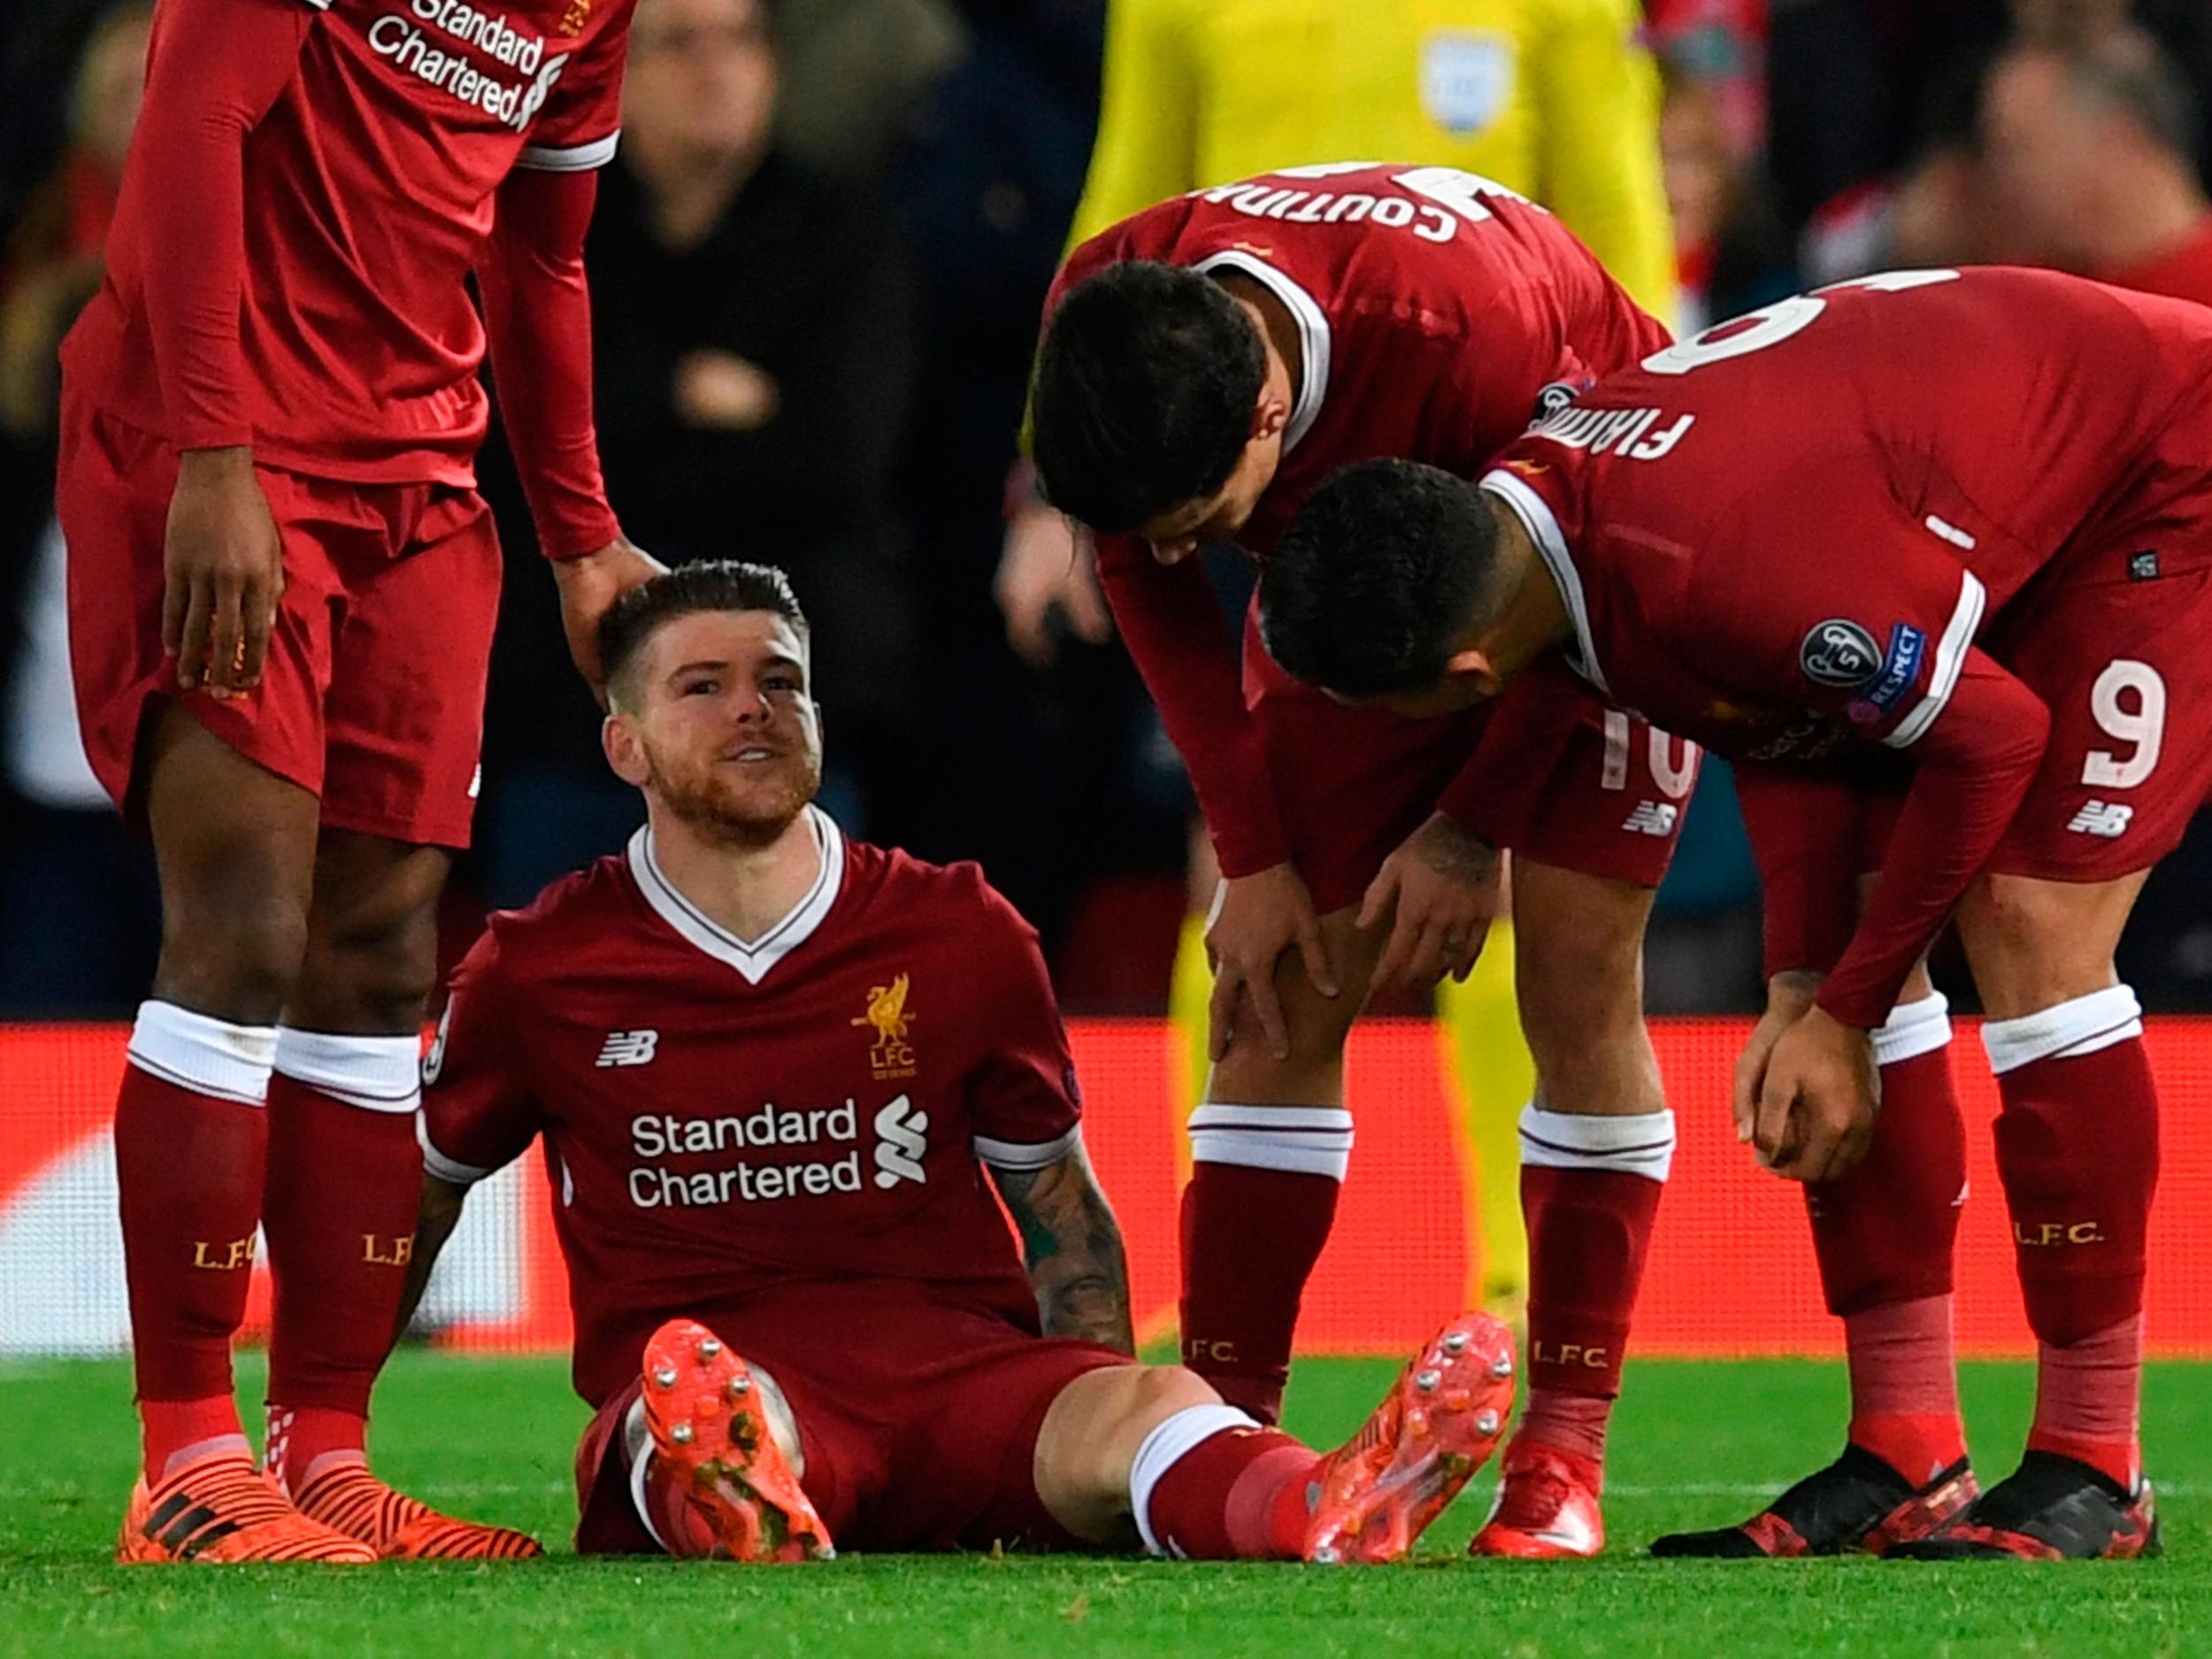 Alberto Moreno injured his ankle during Liverpool's Champions League win over Spartak Moscow